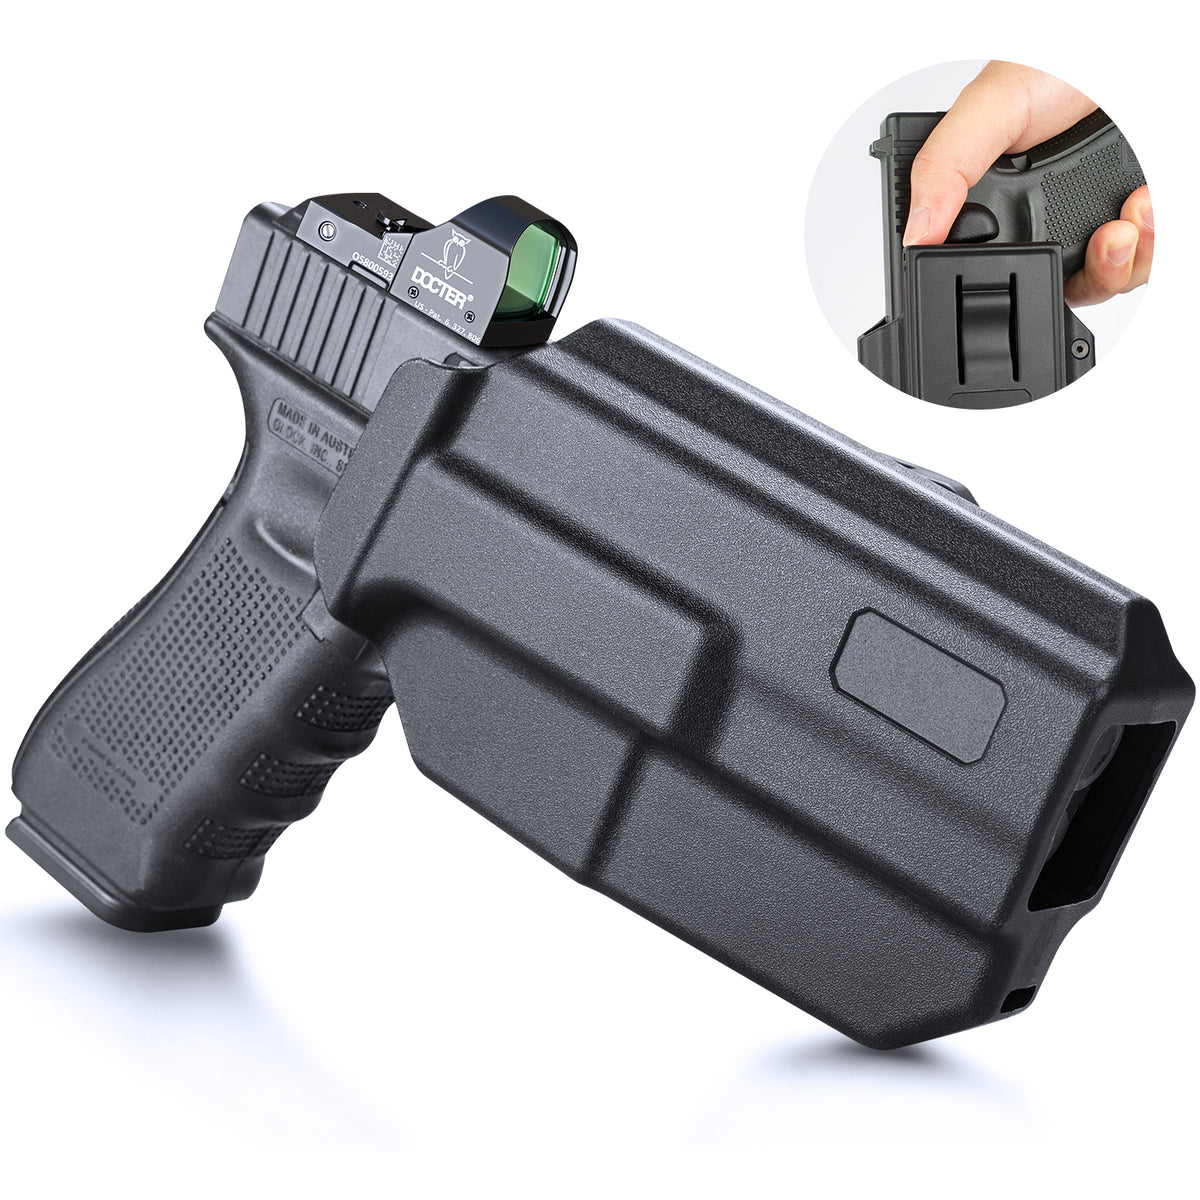 Level II Retention Thumb Release OWB Holster Glock 17 22 31 with Red Dot Optics Cut | WARRIORLAND